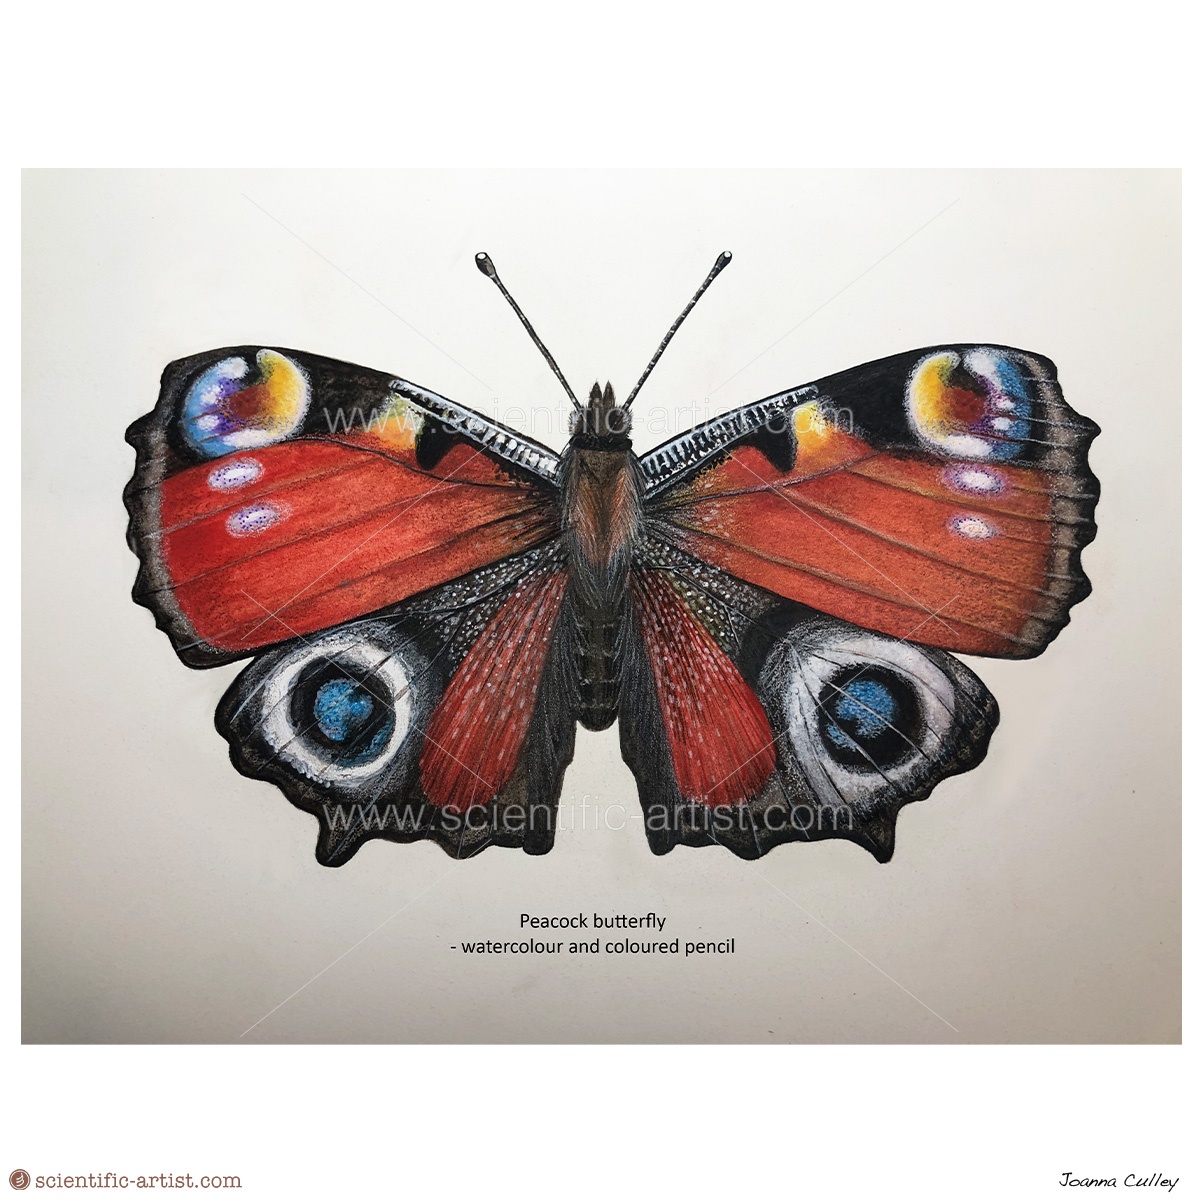 Peacock Butterfly Scientific Scientific Artist Joanna Culley Providing Art And 